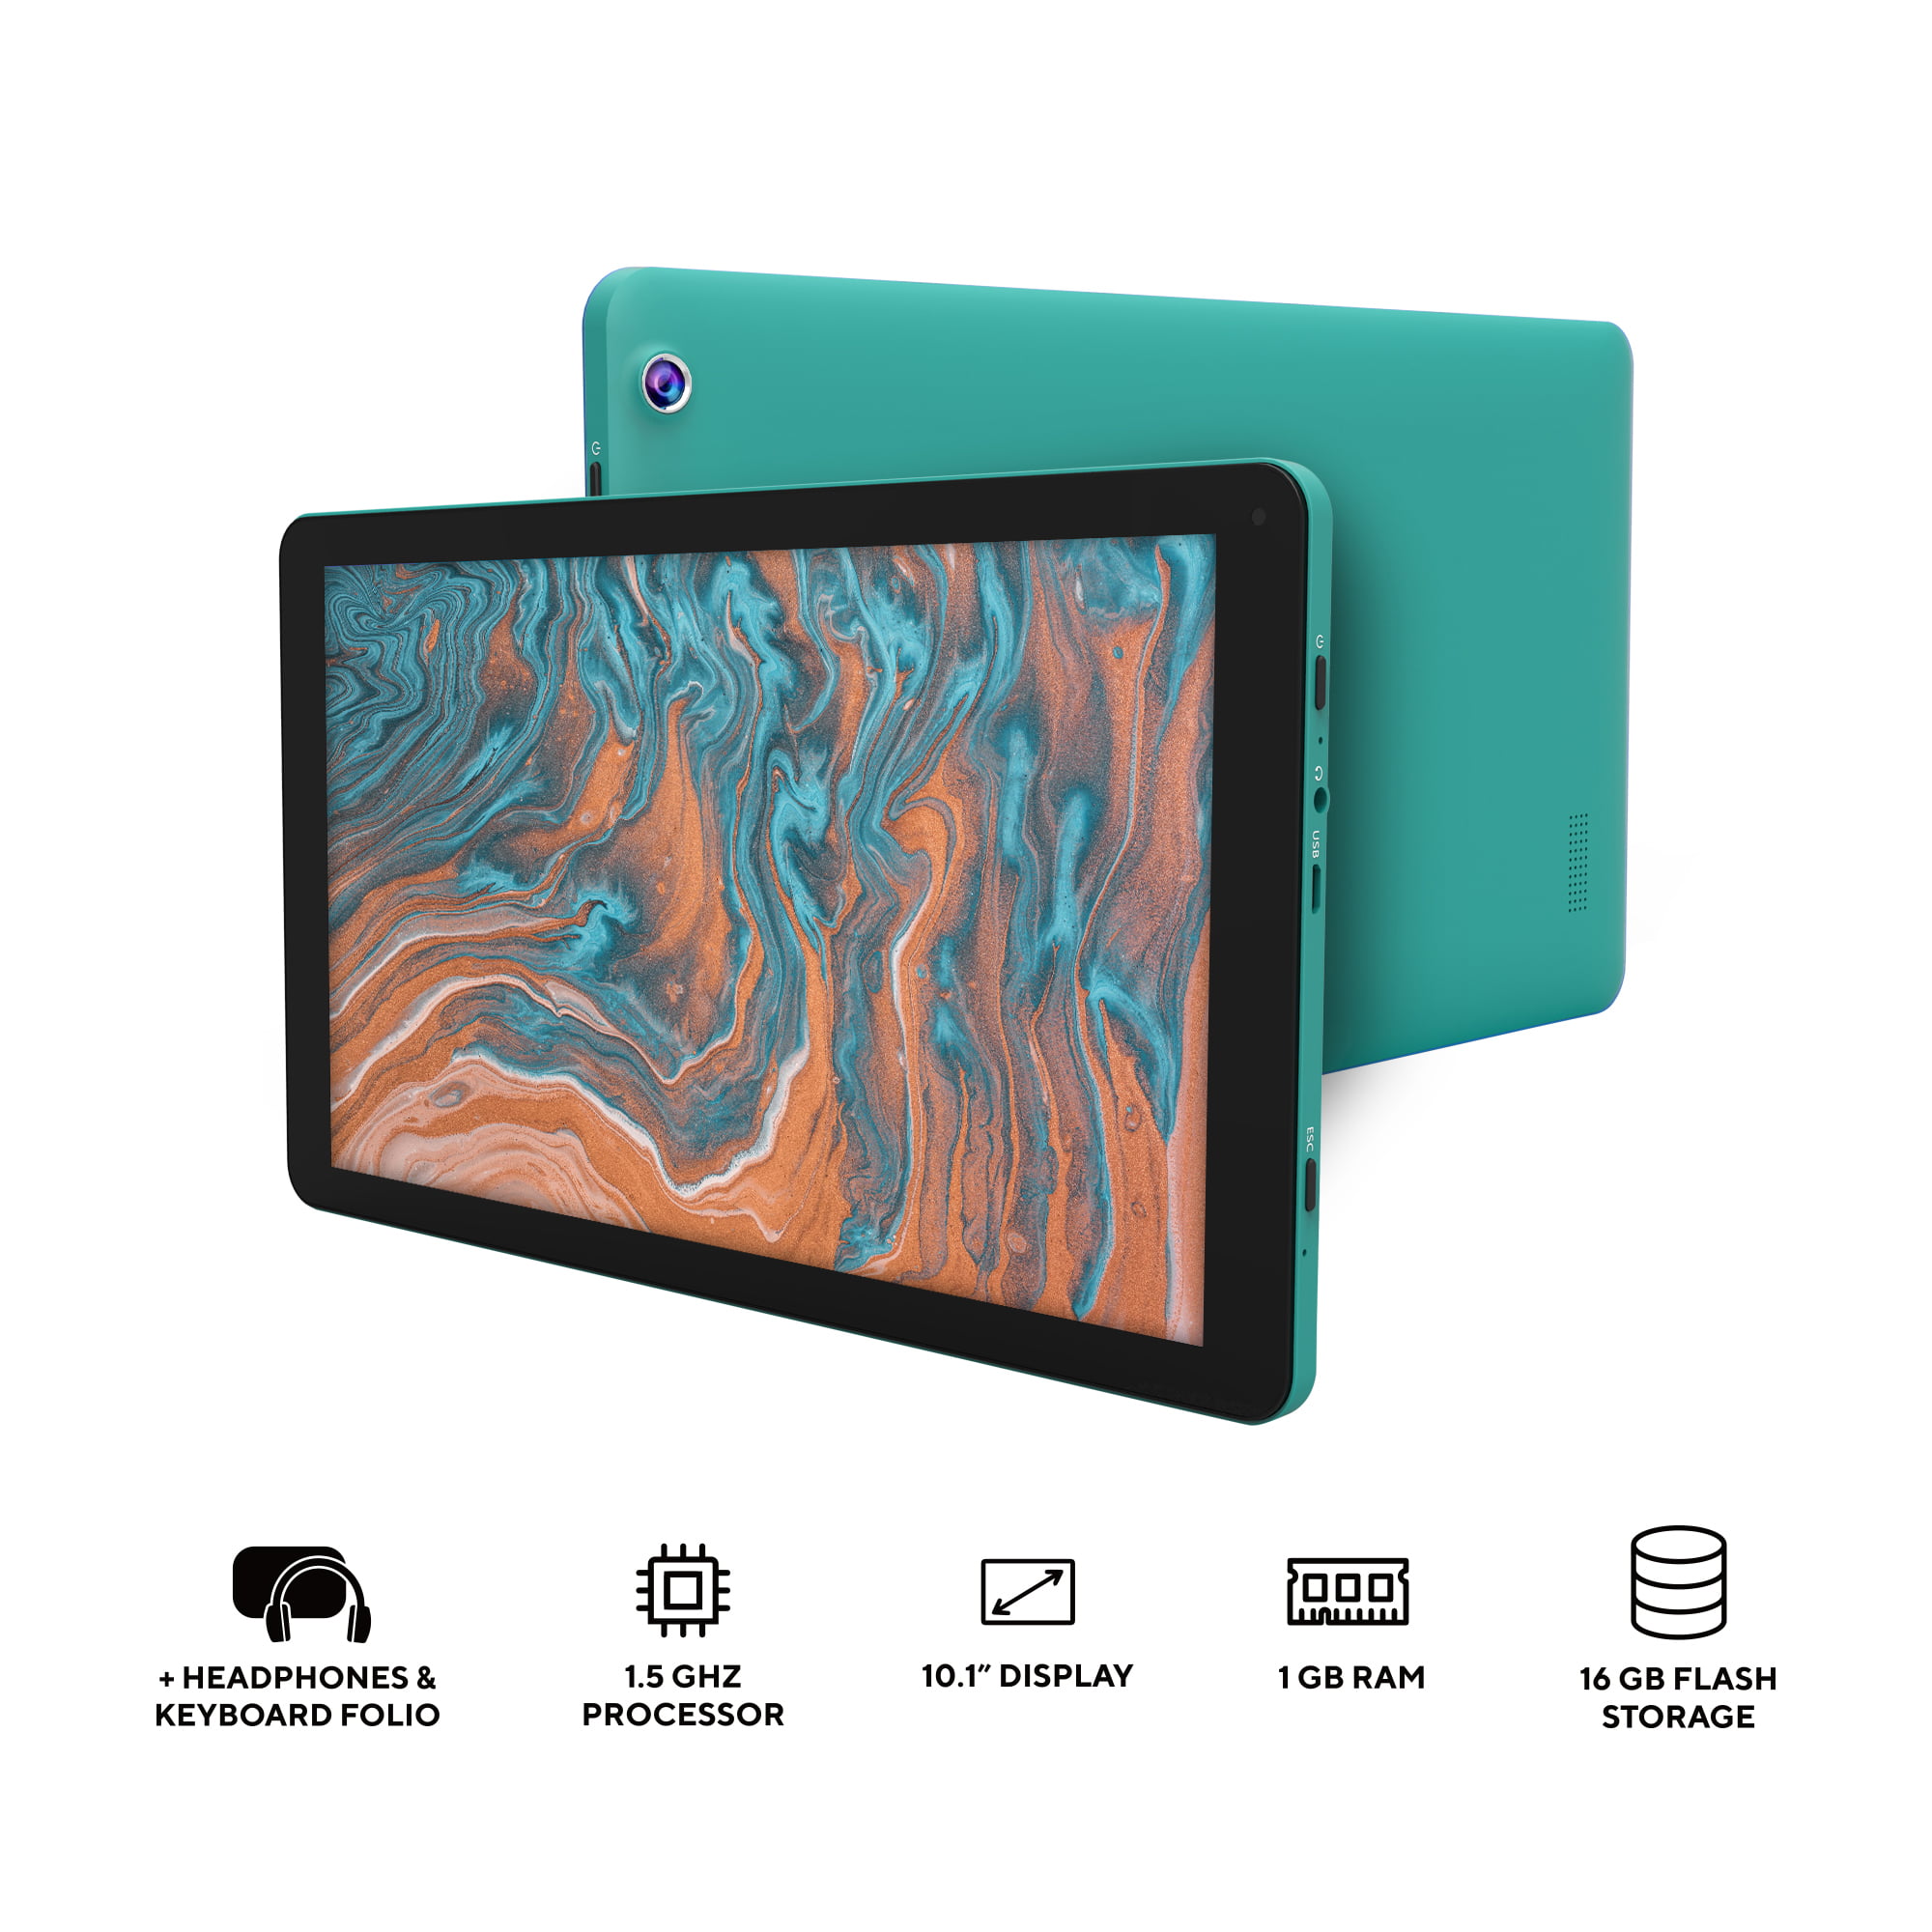 Core Innovations Ctb1016g 10 1 Quad Core Tablet With Headphones Keyboard Folio Teal Walmart Com Walmart Com - code forpower core roblox innovatoin game